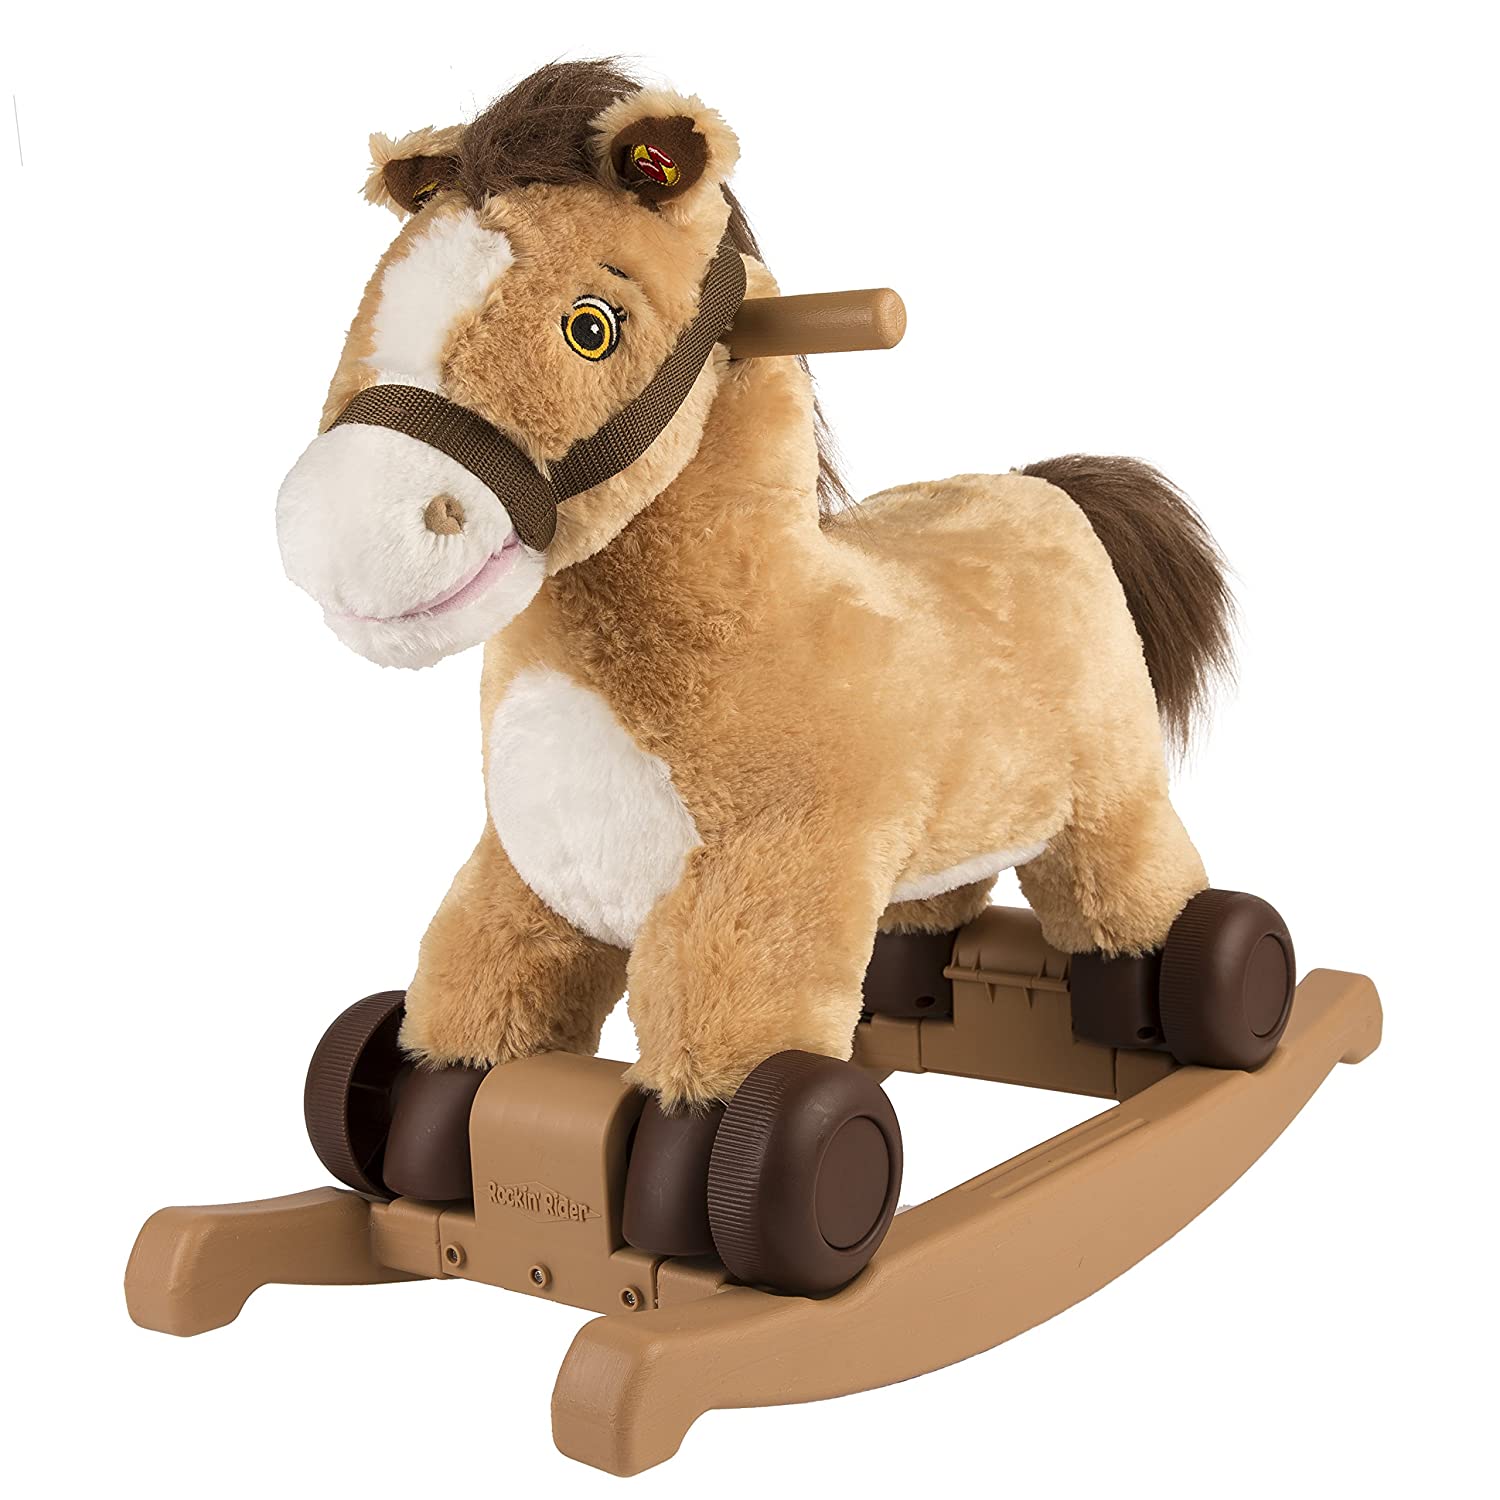 Top 9 Best Rocking Horses Toy Reviews in 2022 1